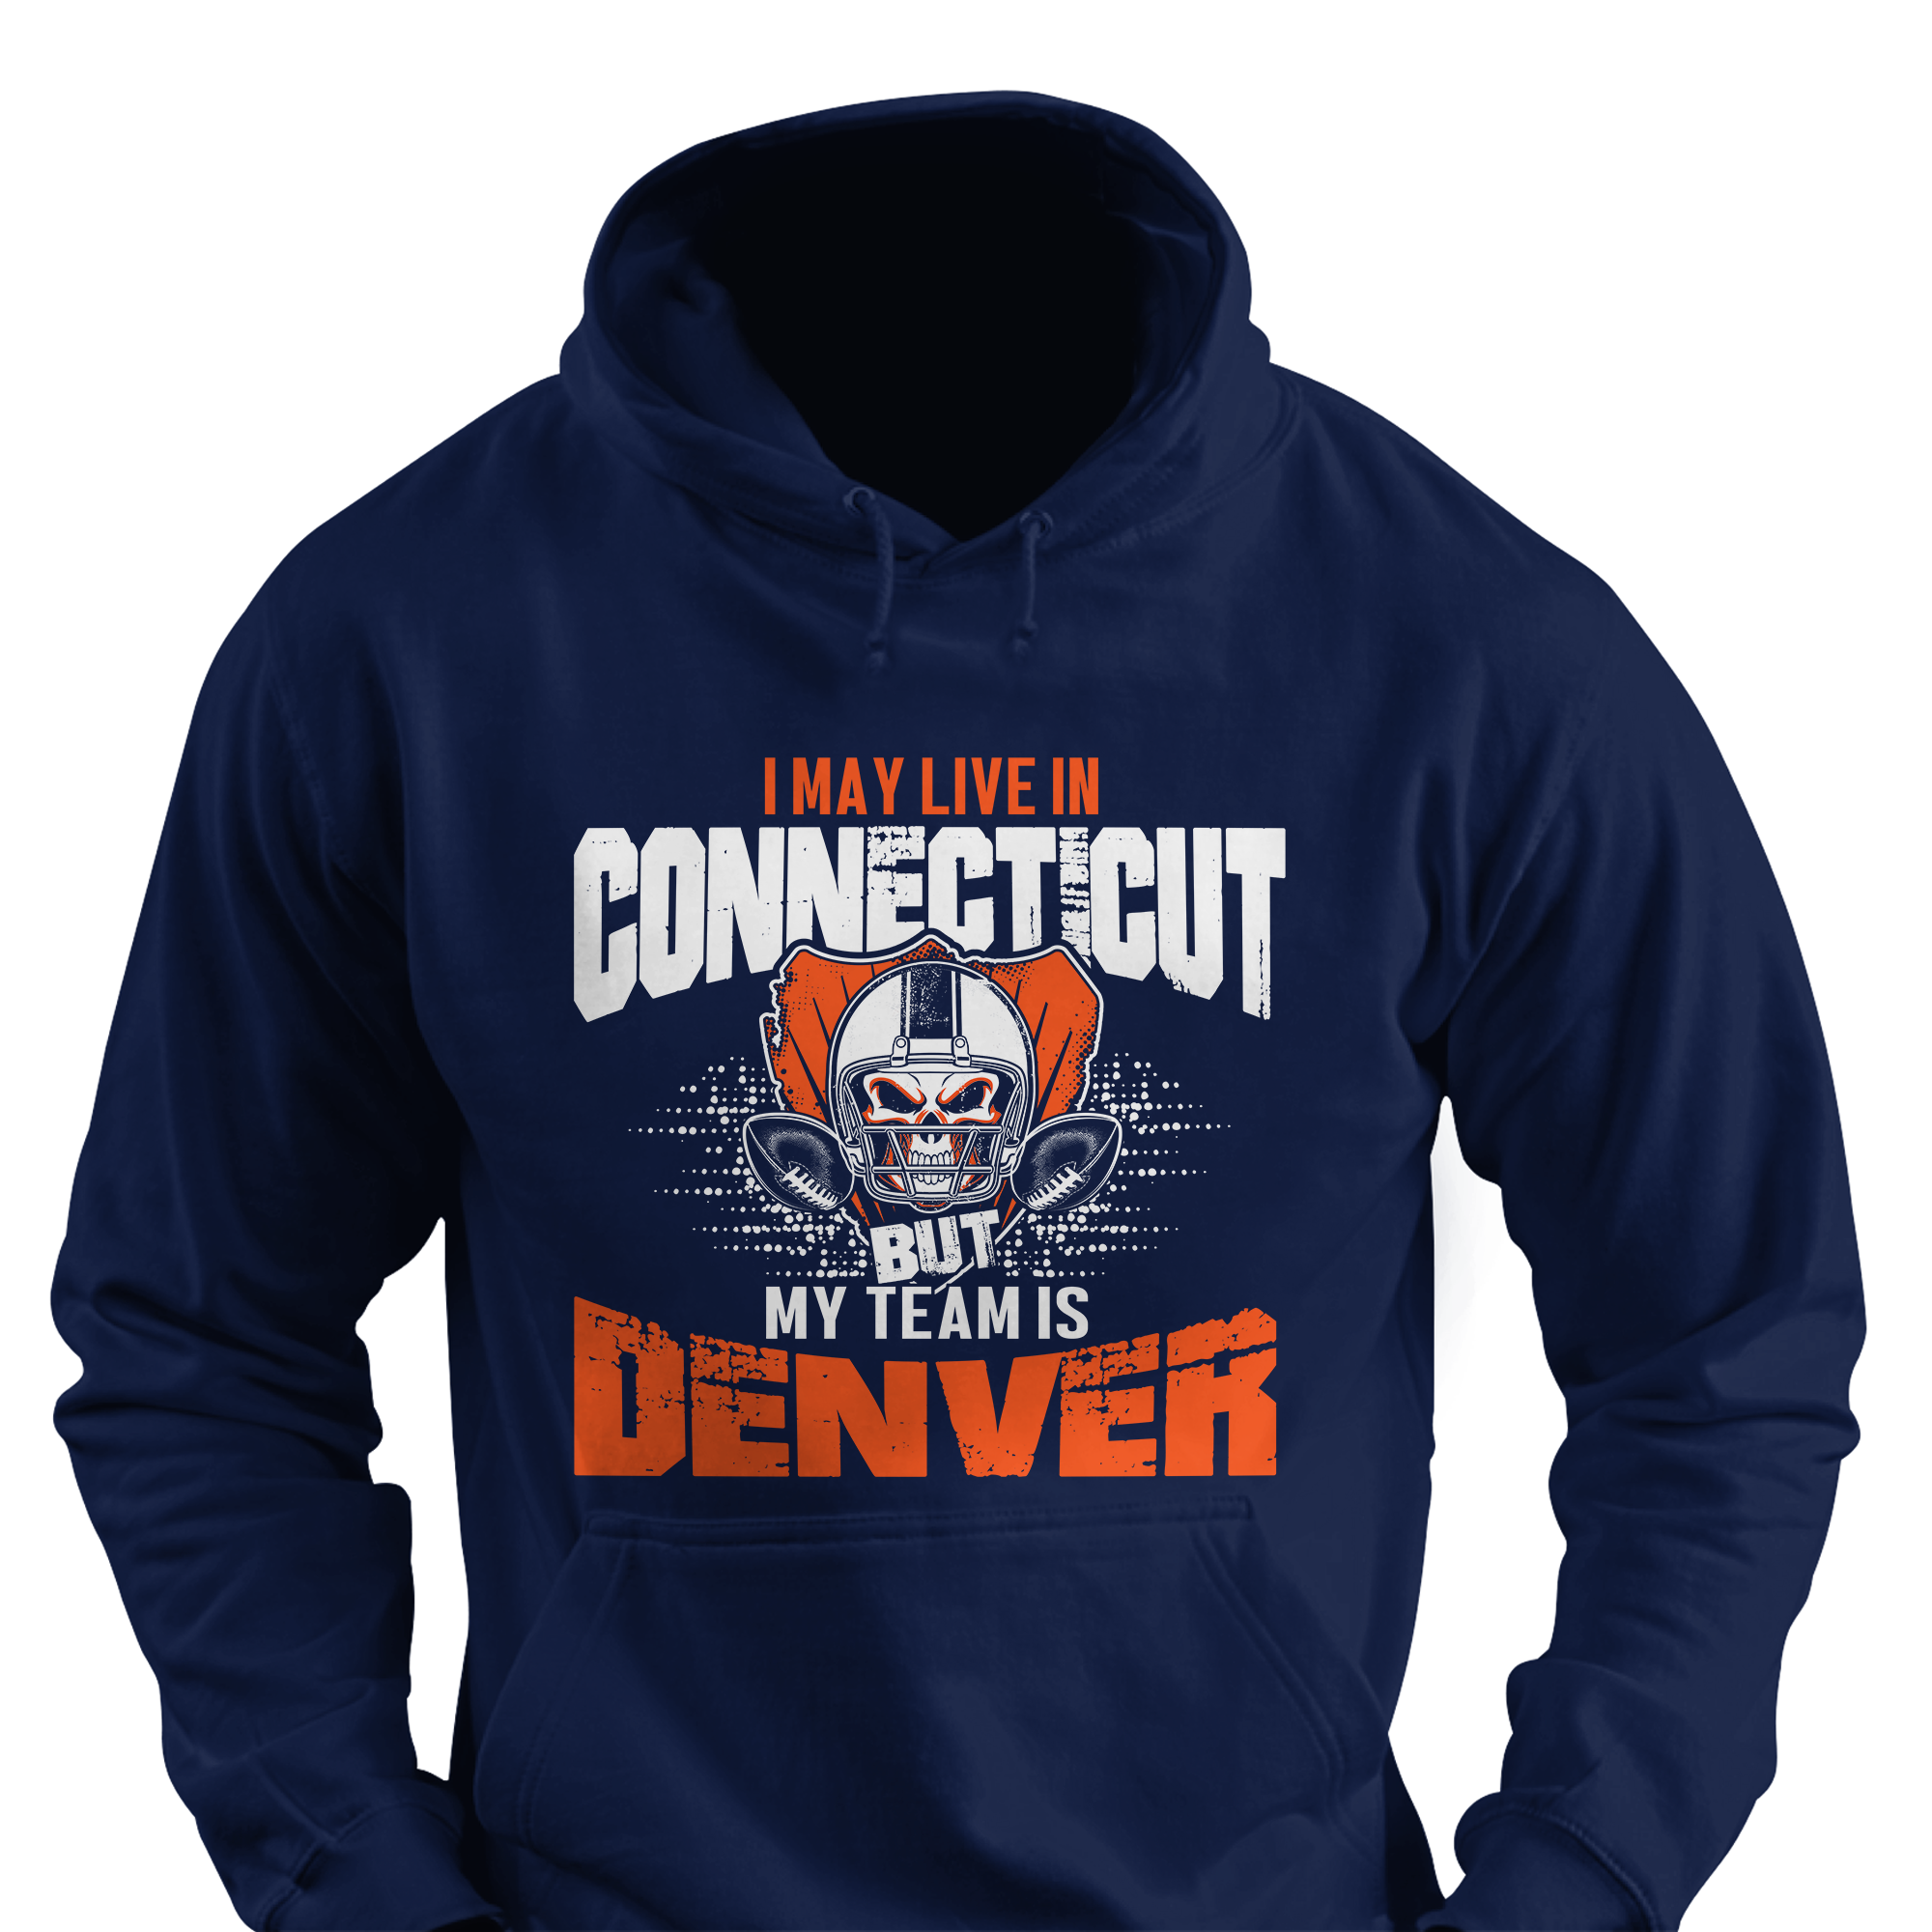 I May Live in Connecticut but My Team is Denver